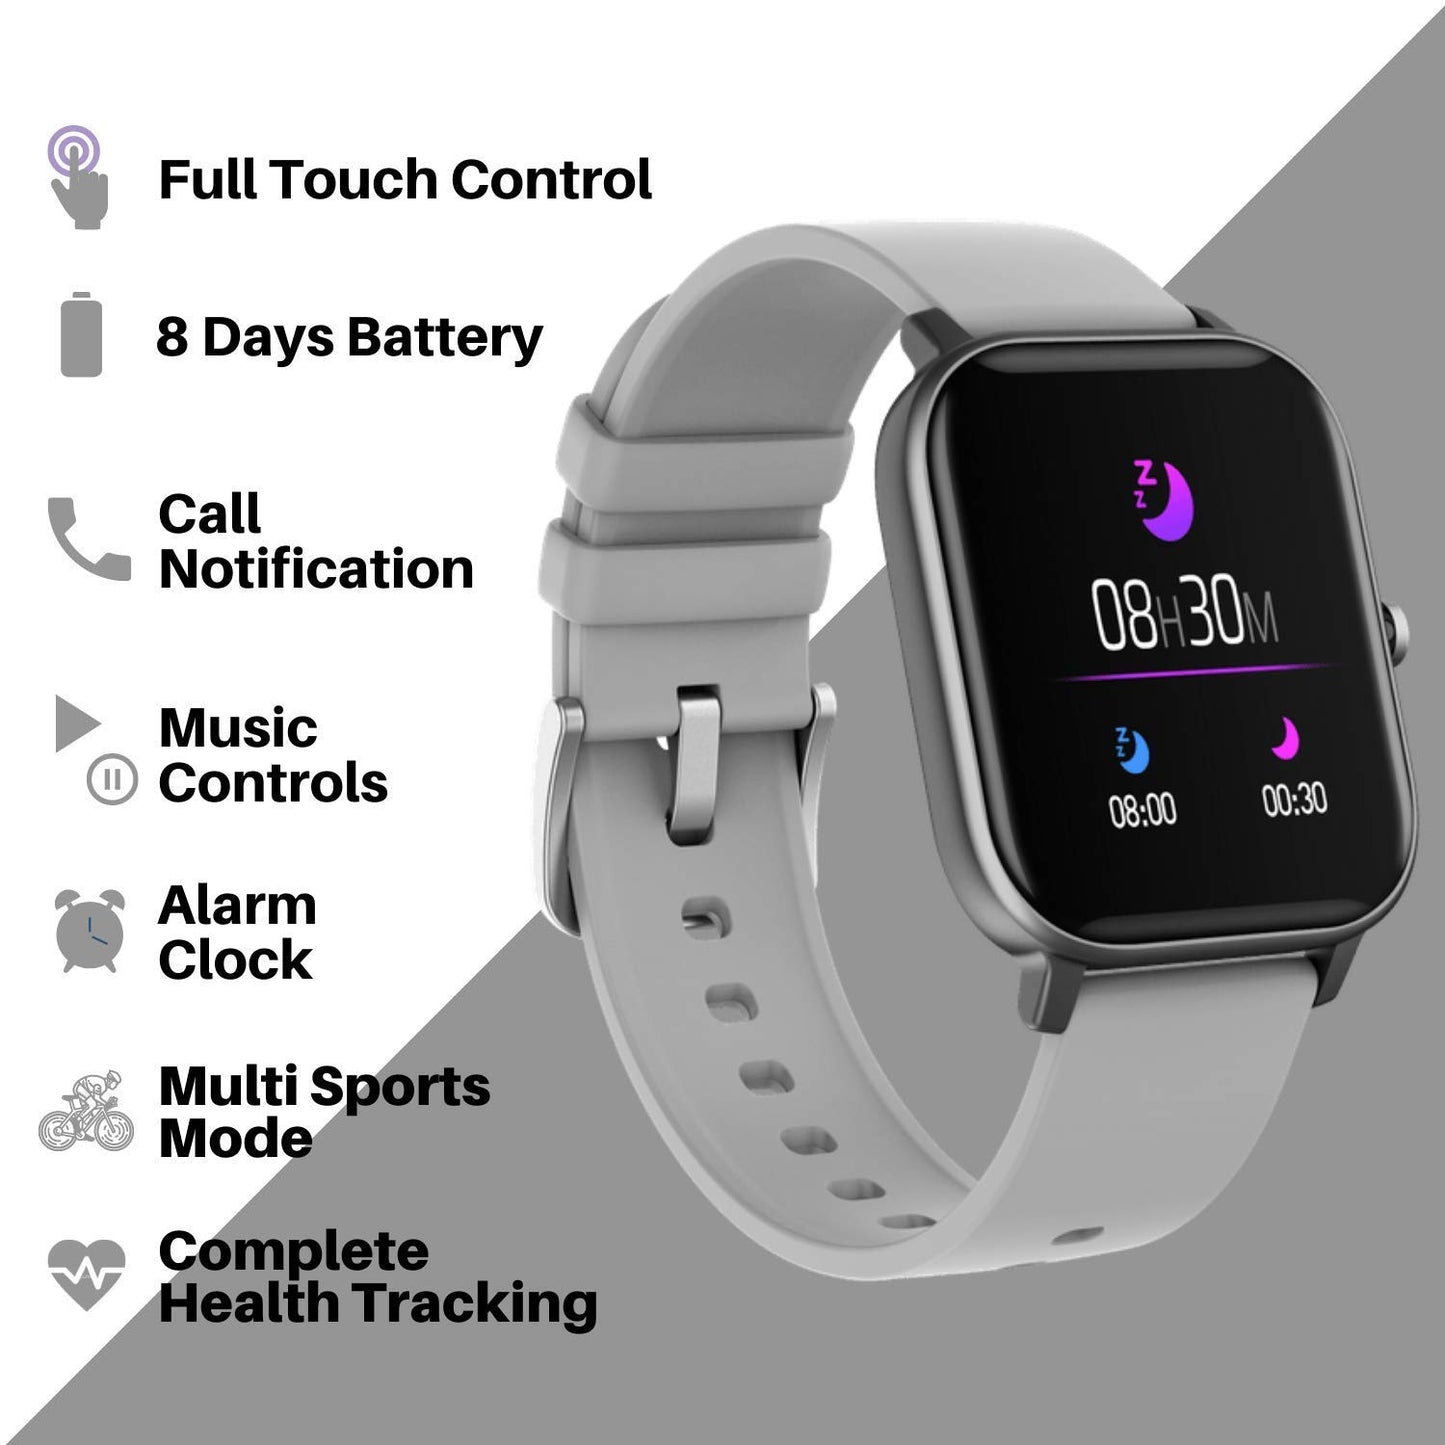 (Refurbished) Fire-Boltt SPO2 Full Touch 1.4 inches 8 Days Battery Life Smart Watch Compatible with Android and iOS IPX7 with Heart Rate, BP, Fitness and Sports Tracking (Grey)